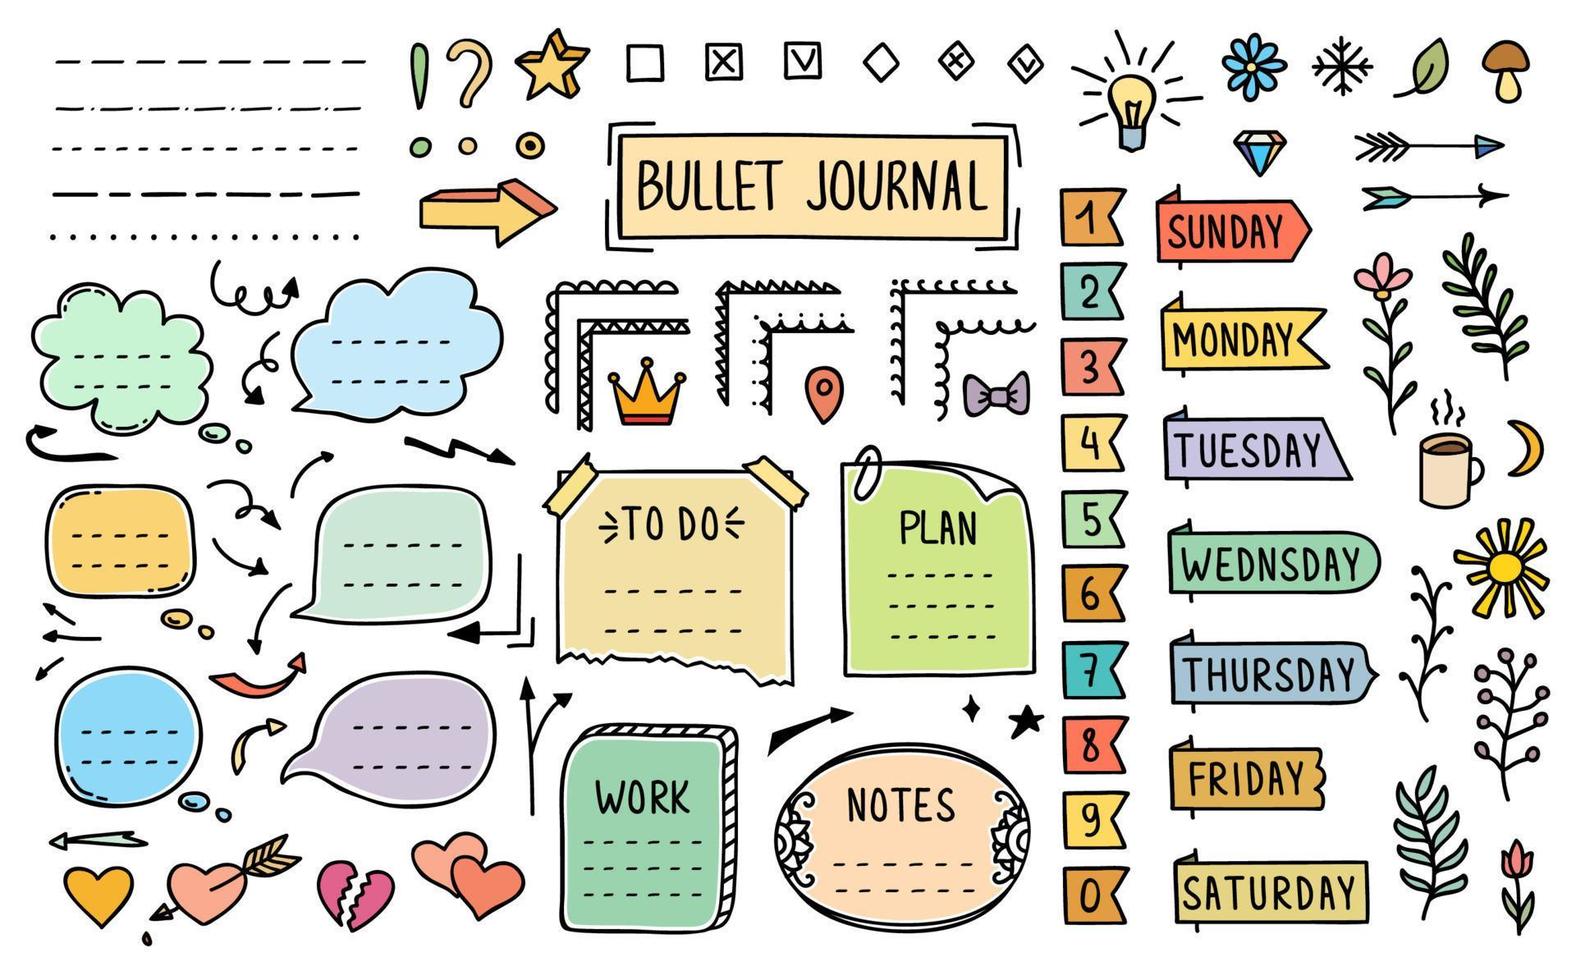 Bullet journal diary doodle elements and stickers vector